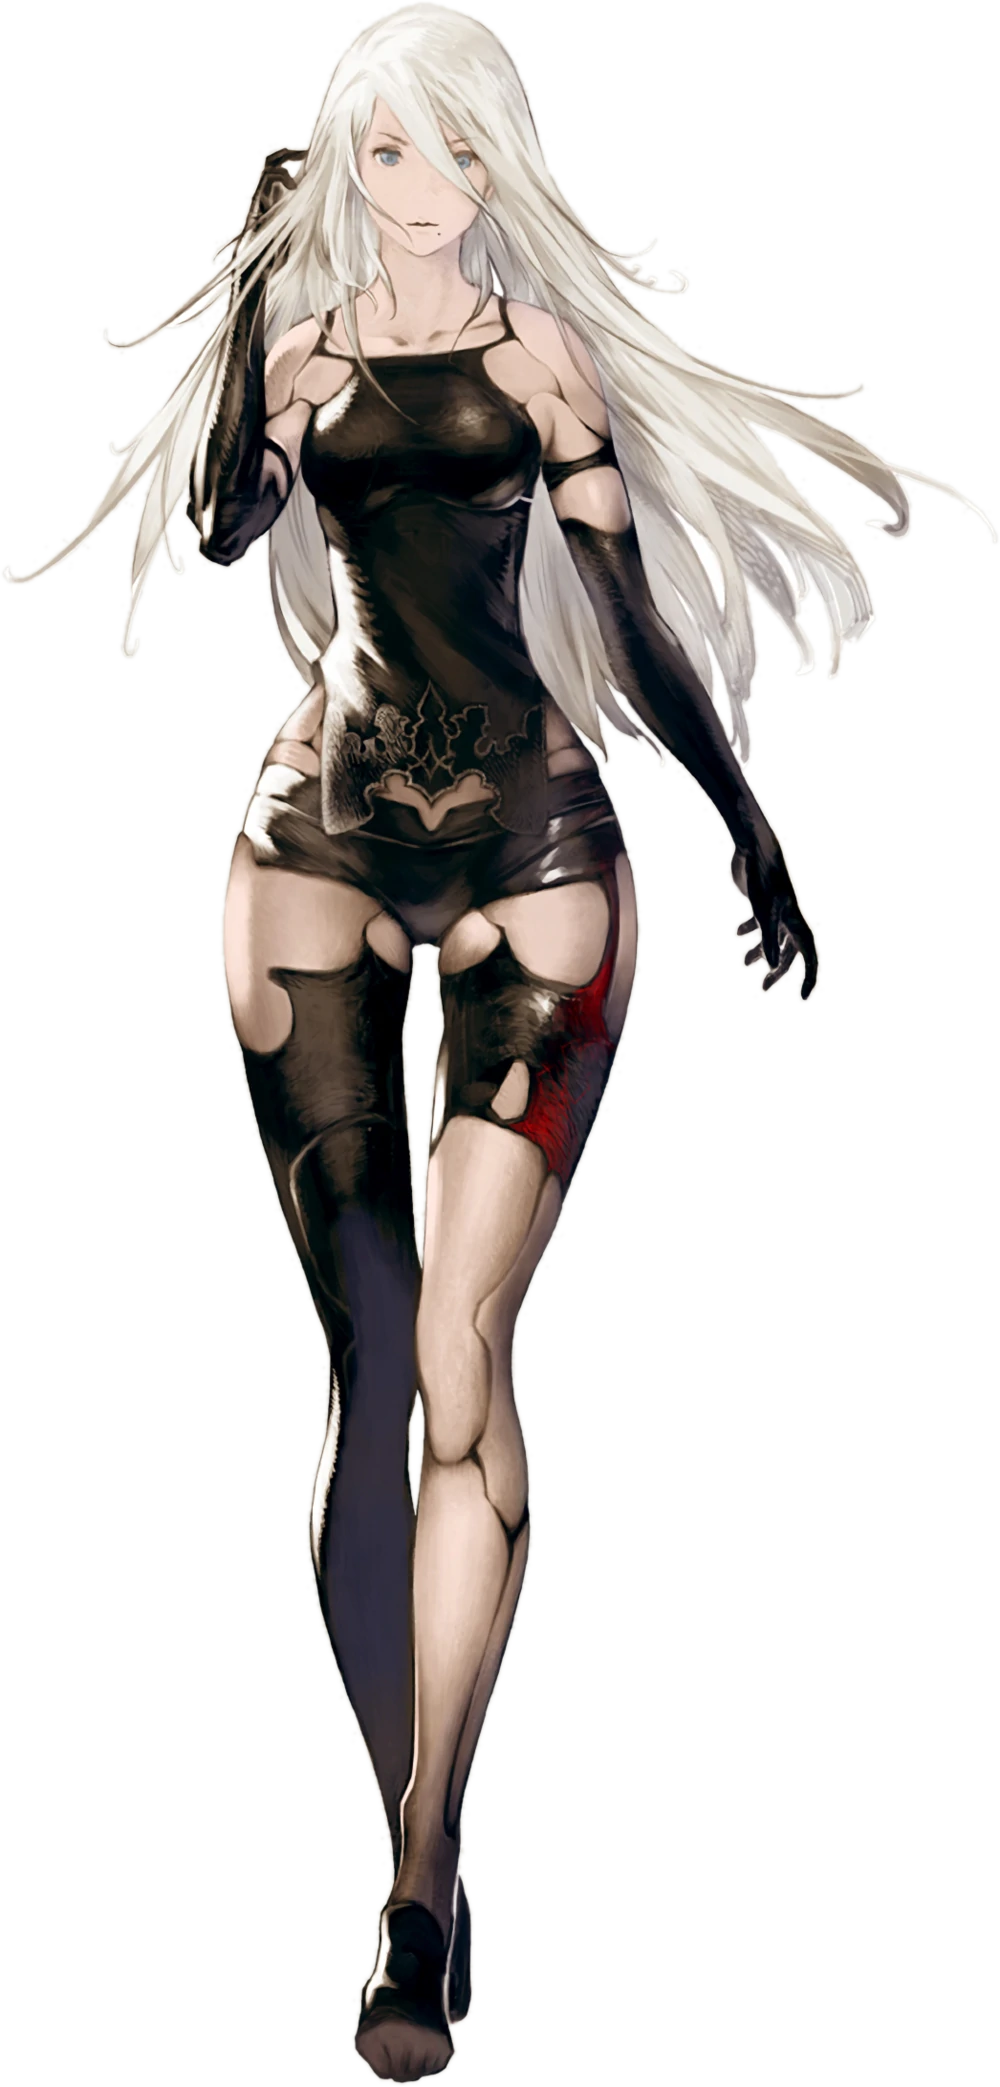 Illustration of A2 as of Automata. She has been heavily damaged by battle, so cracks are showing through her skin, and there are places where it does not cover the underlying black material at all. For clothing, she just has a black scrap of YoRHa uniform. Her arms resemble long gloves. She has loose white hair down to her waist.